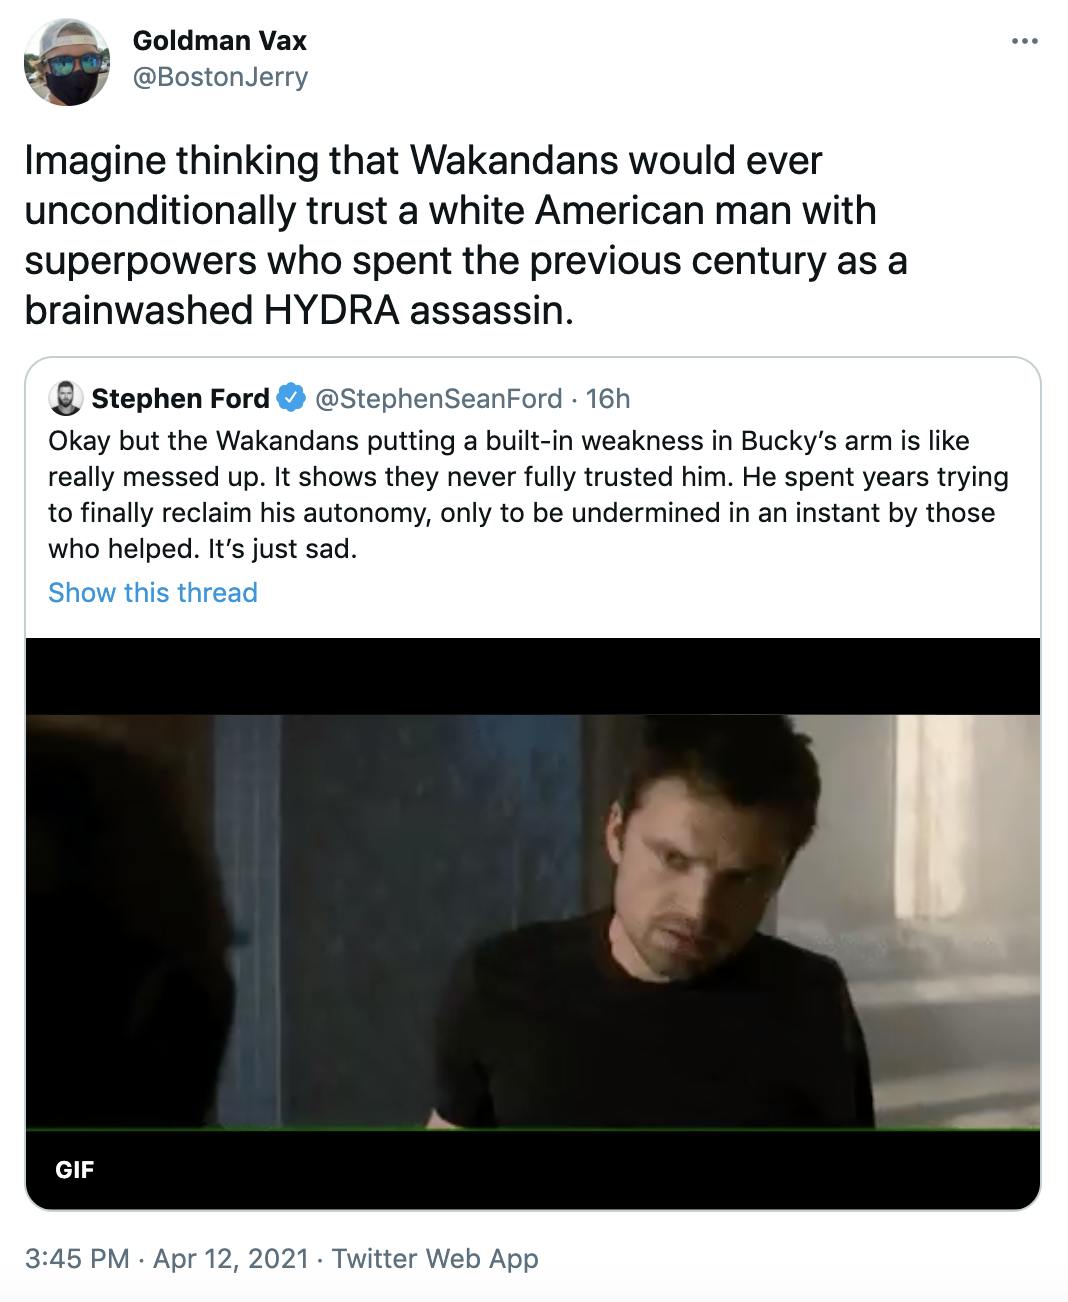 Imagine thinking that Wakandans would ever unconditionally trust a white American man with superpowers who spent the previous century as a brainwashed HYDRA assassin.